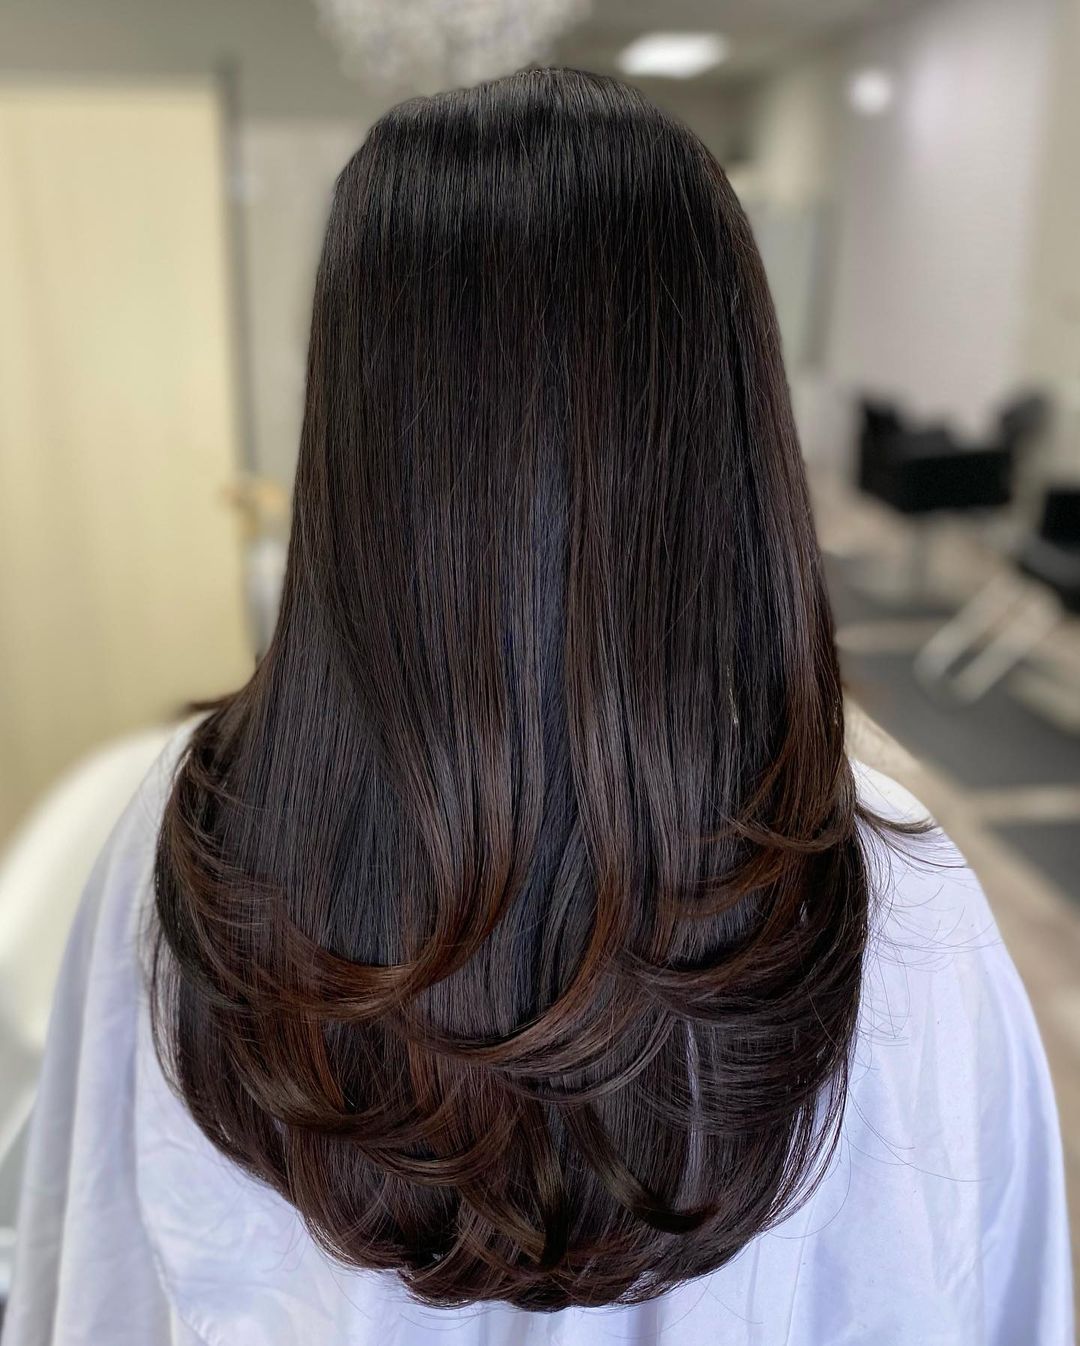 Smooth Dark Brown Hair with Flippy Ends